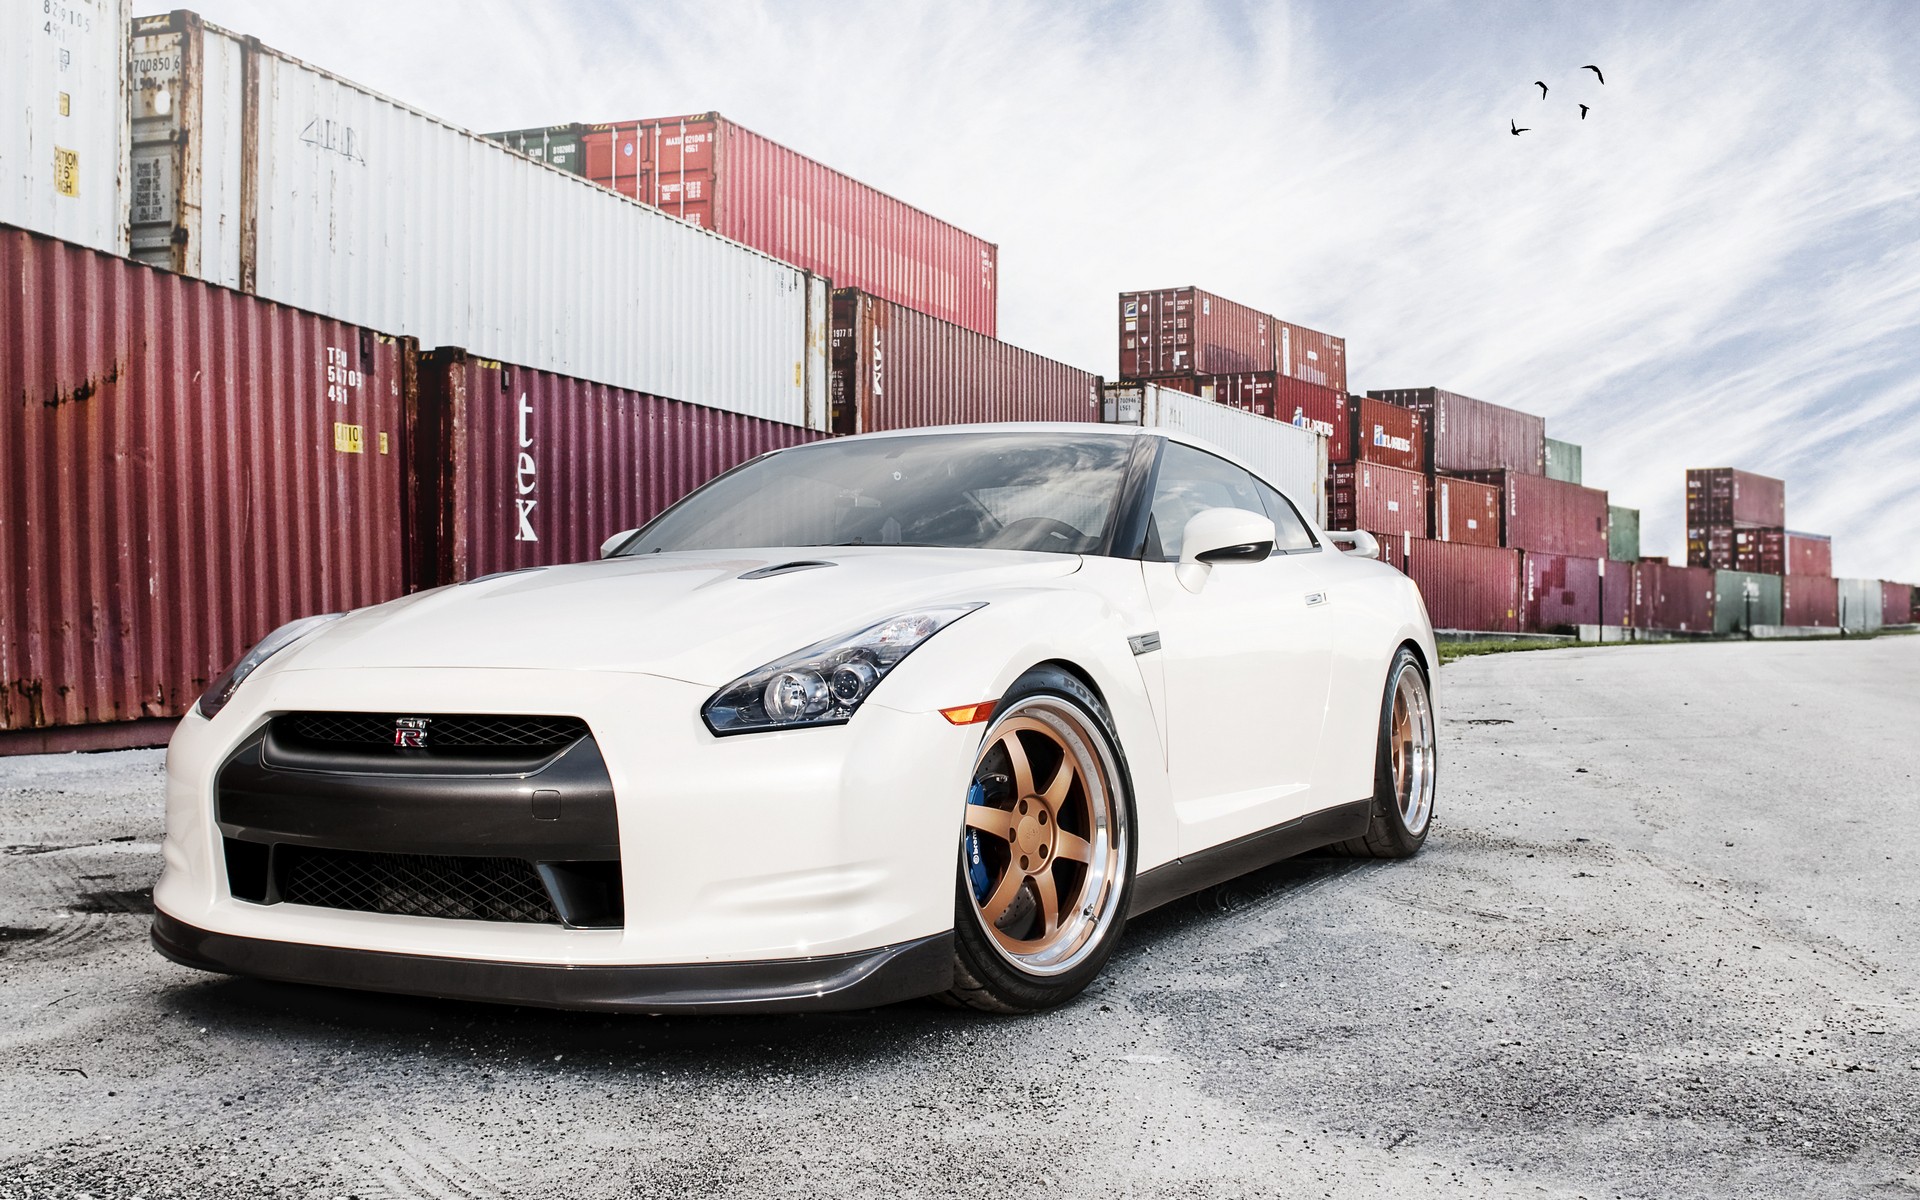 cars, Nissan, Vehicles, White, Cars, Gt r, Containers, Nissan, Gt r Wallpaper